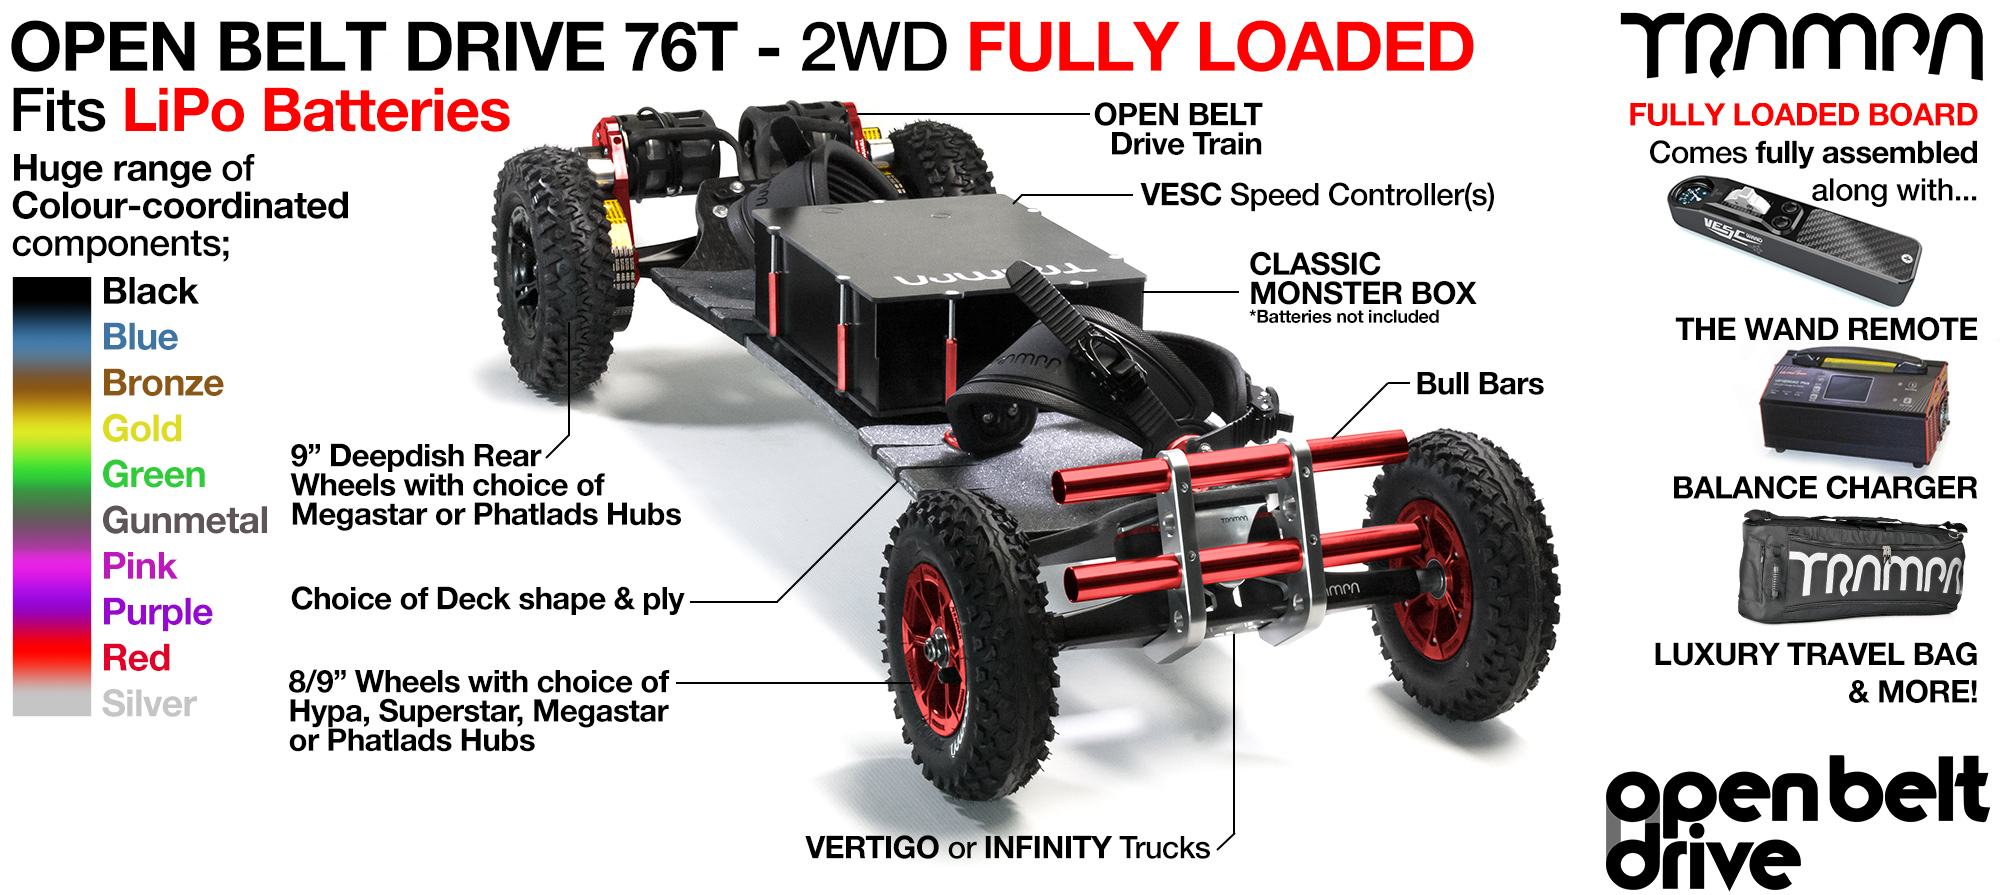 2WD 76T Open Belt Drive TRAMPA Electric Mountainboard with 9Inch Wheels & 76 Tooth Pulleys - FULLY LOADED Li-Po